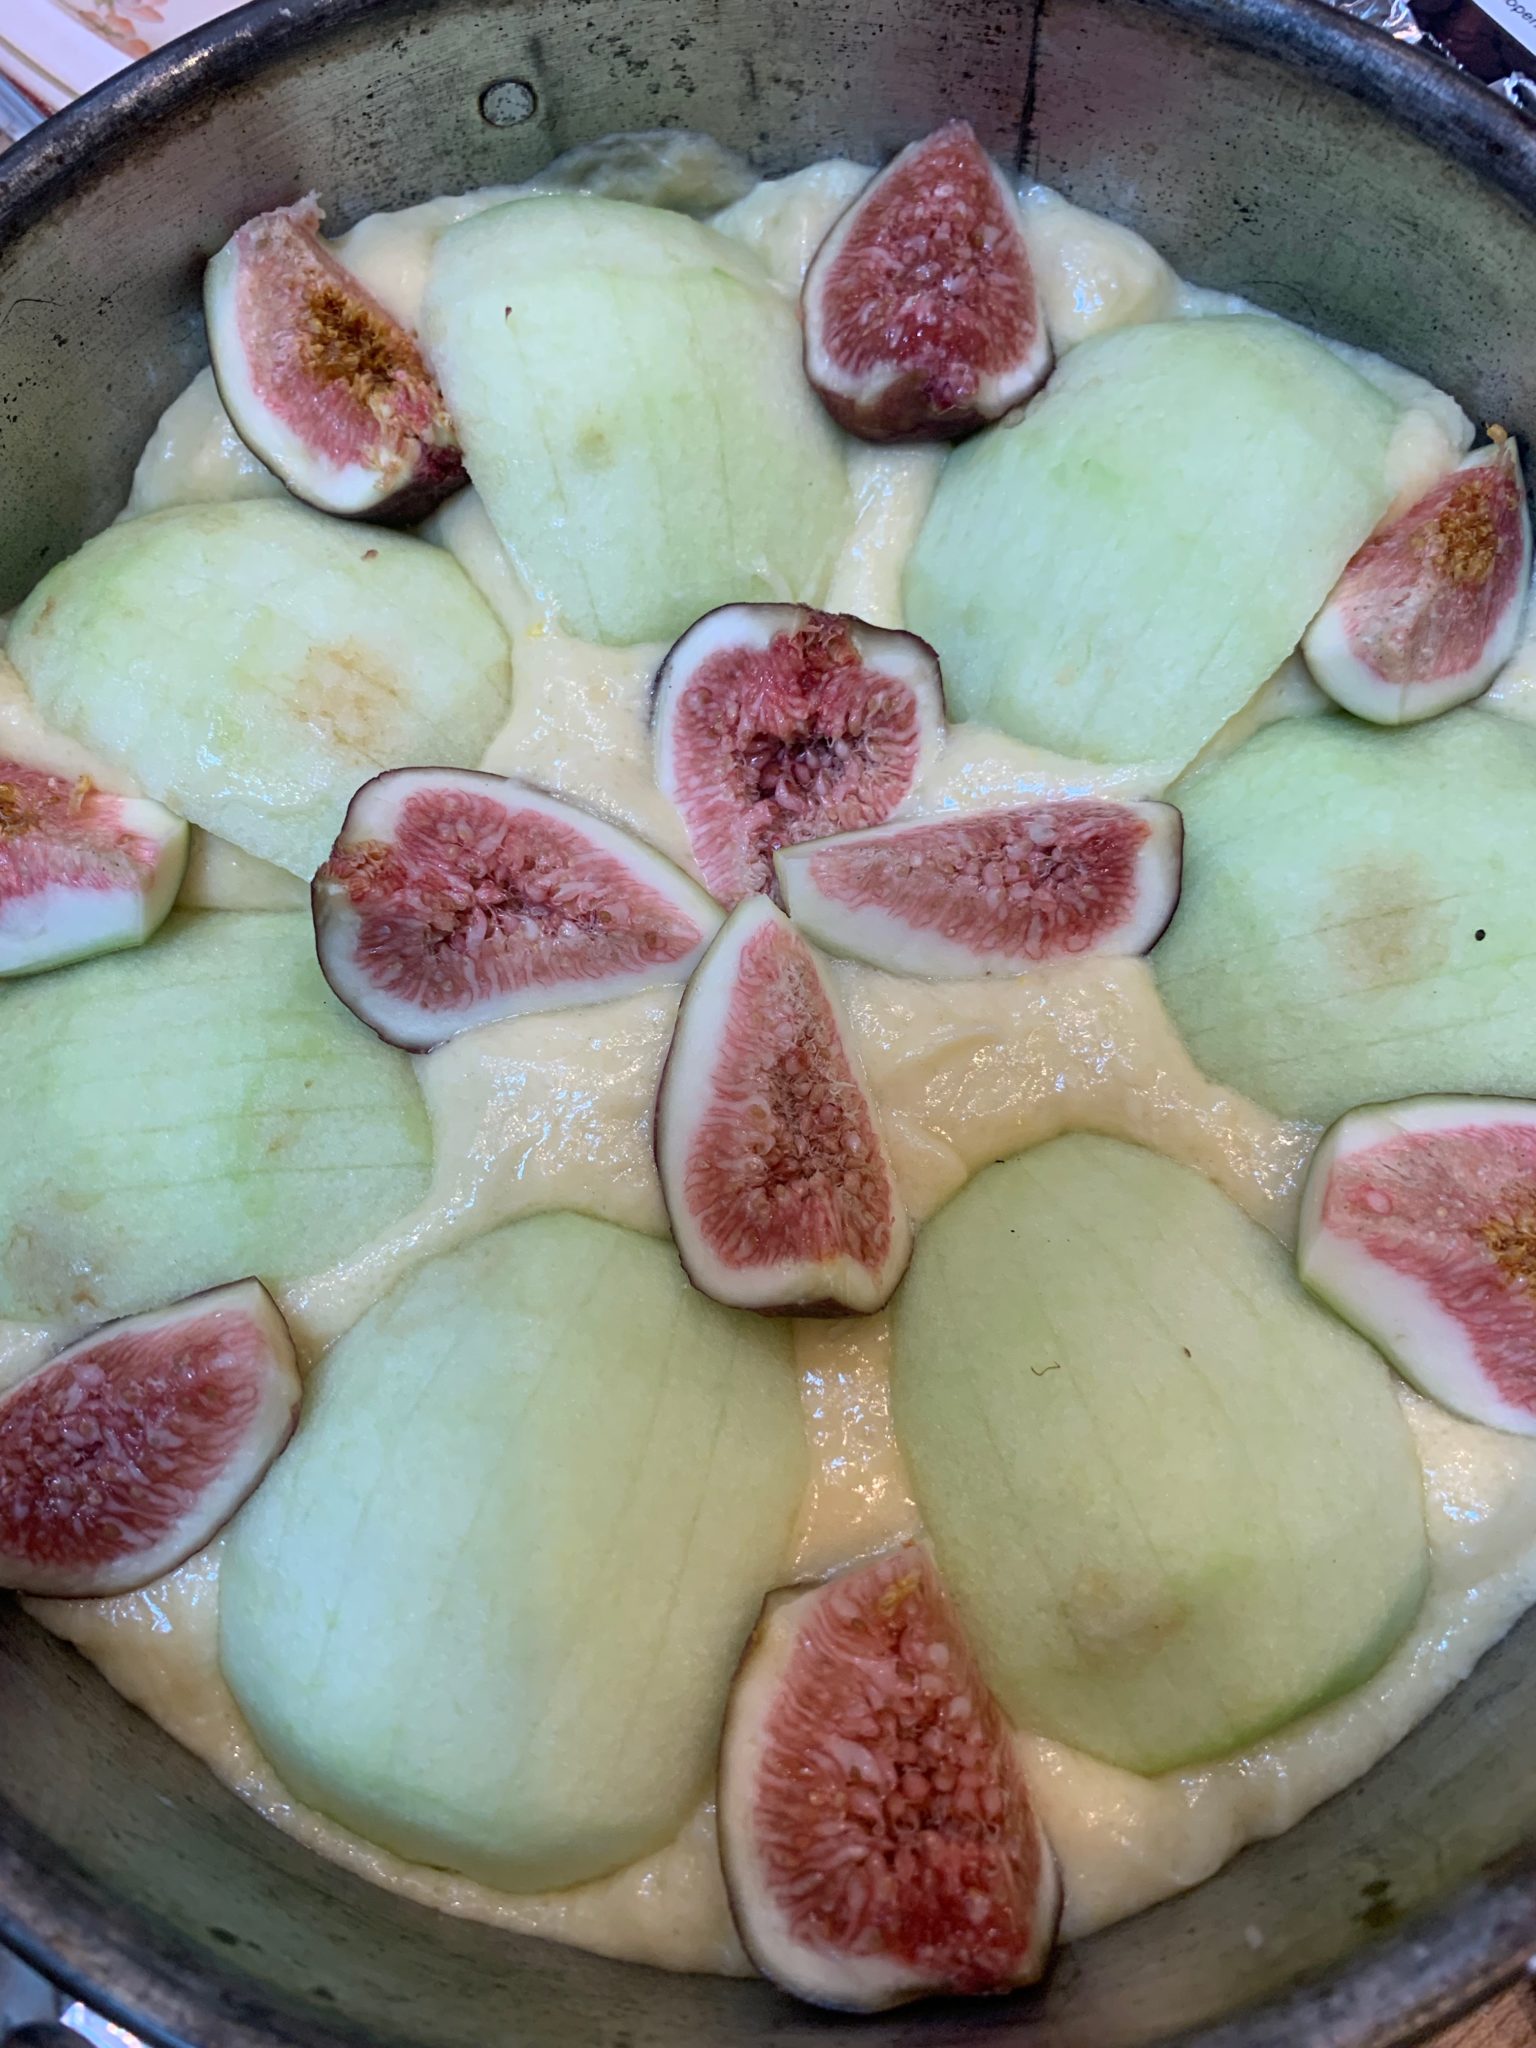 Apples and figs arranged on top of a yellow cake batter